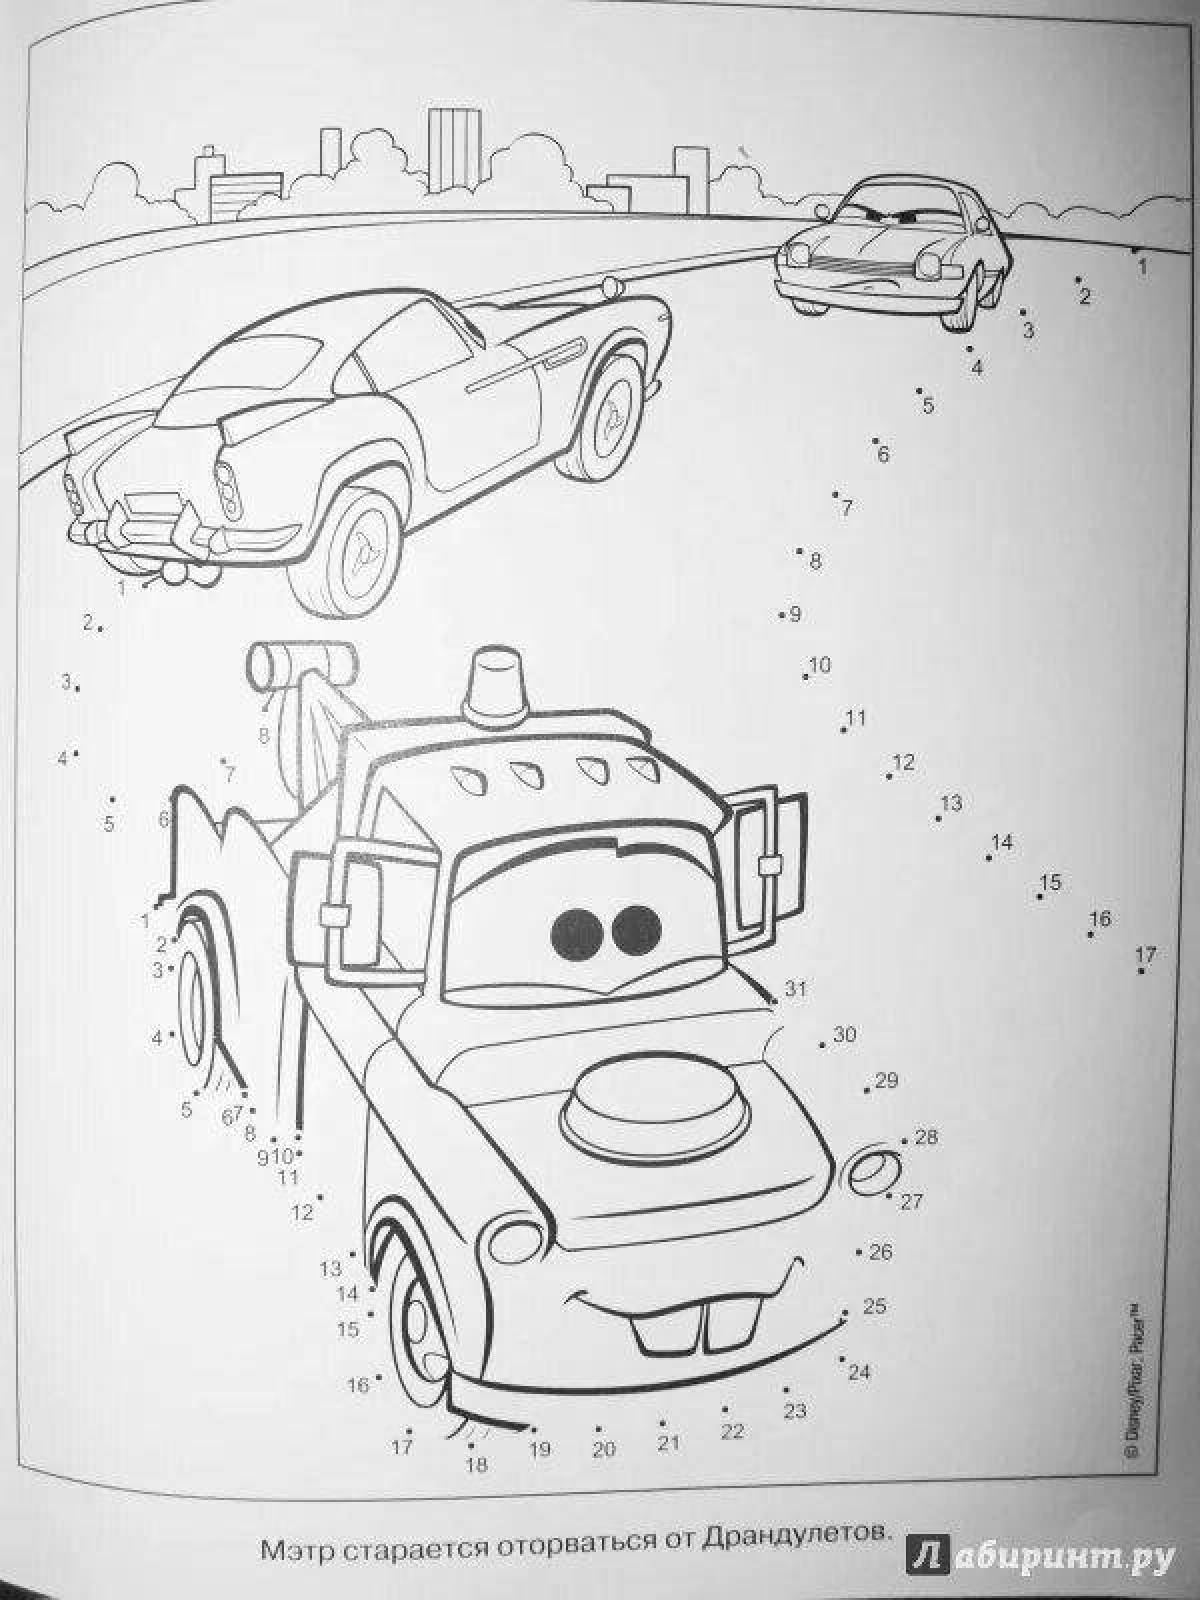 Exciting cars 2 coloring book